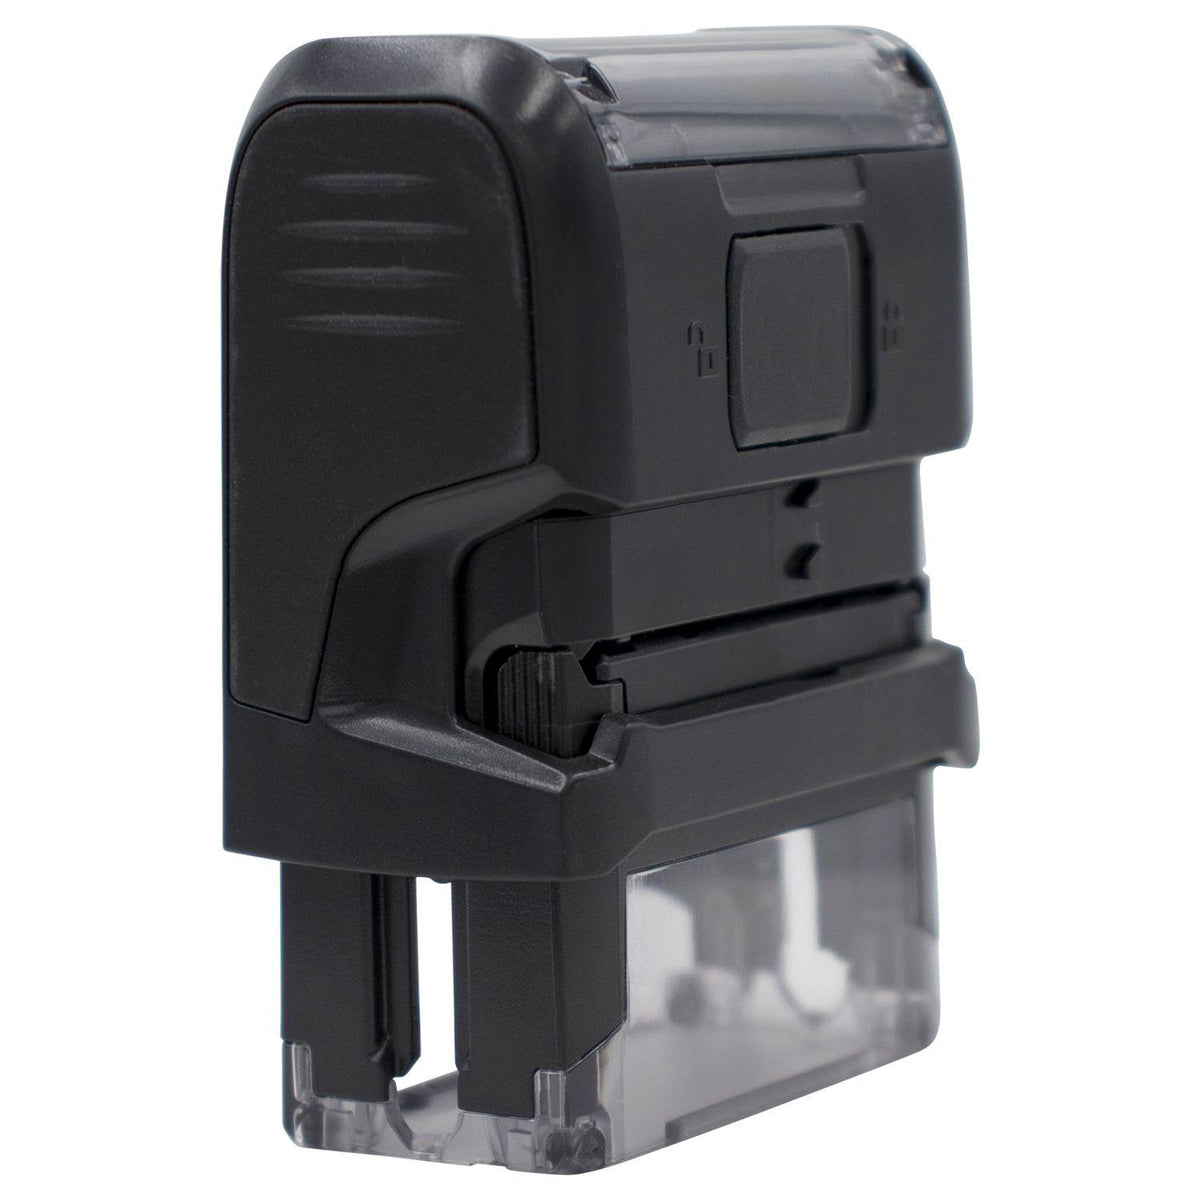 Self Inking Exhibit Stamp - Engineer Seal Stamps - Brand_Trodat, Impression Size_Small, Stamp Type_Self-Inking Stamp, Type of Use_Legal